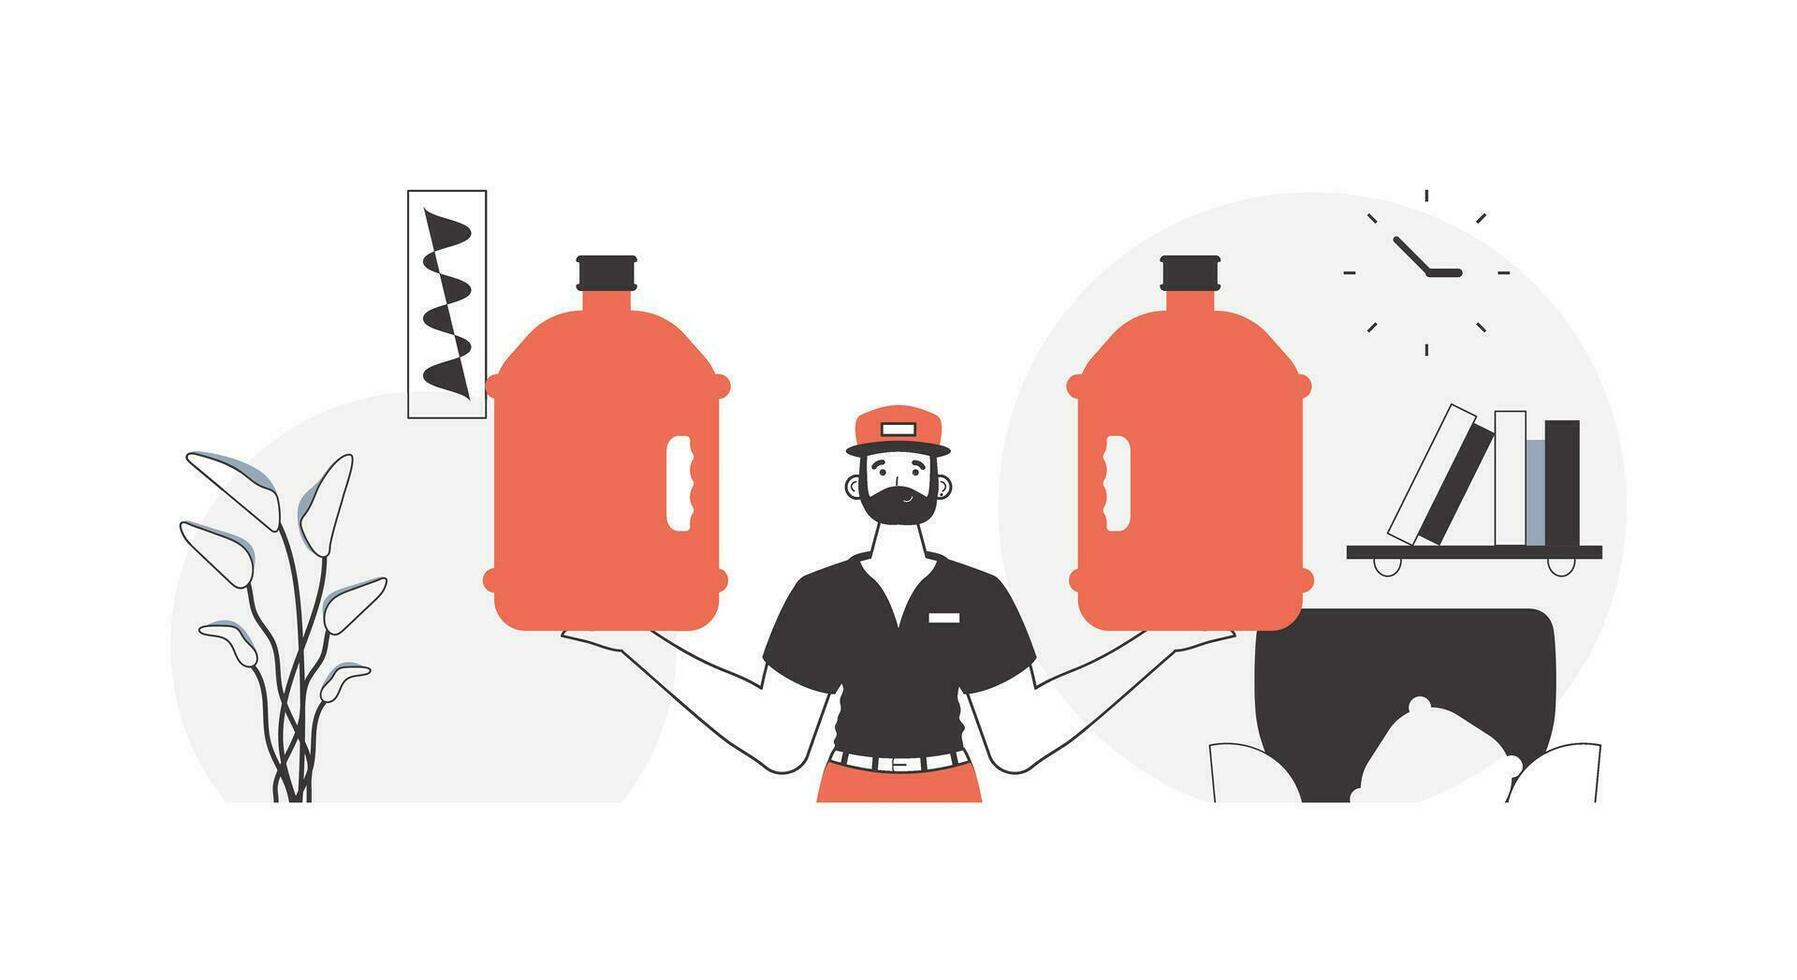 Deliveryman. with a large bottle of water in hand. Water delivery concept. Linear modern style. vector